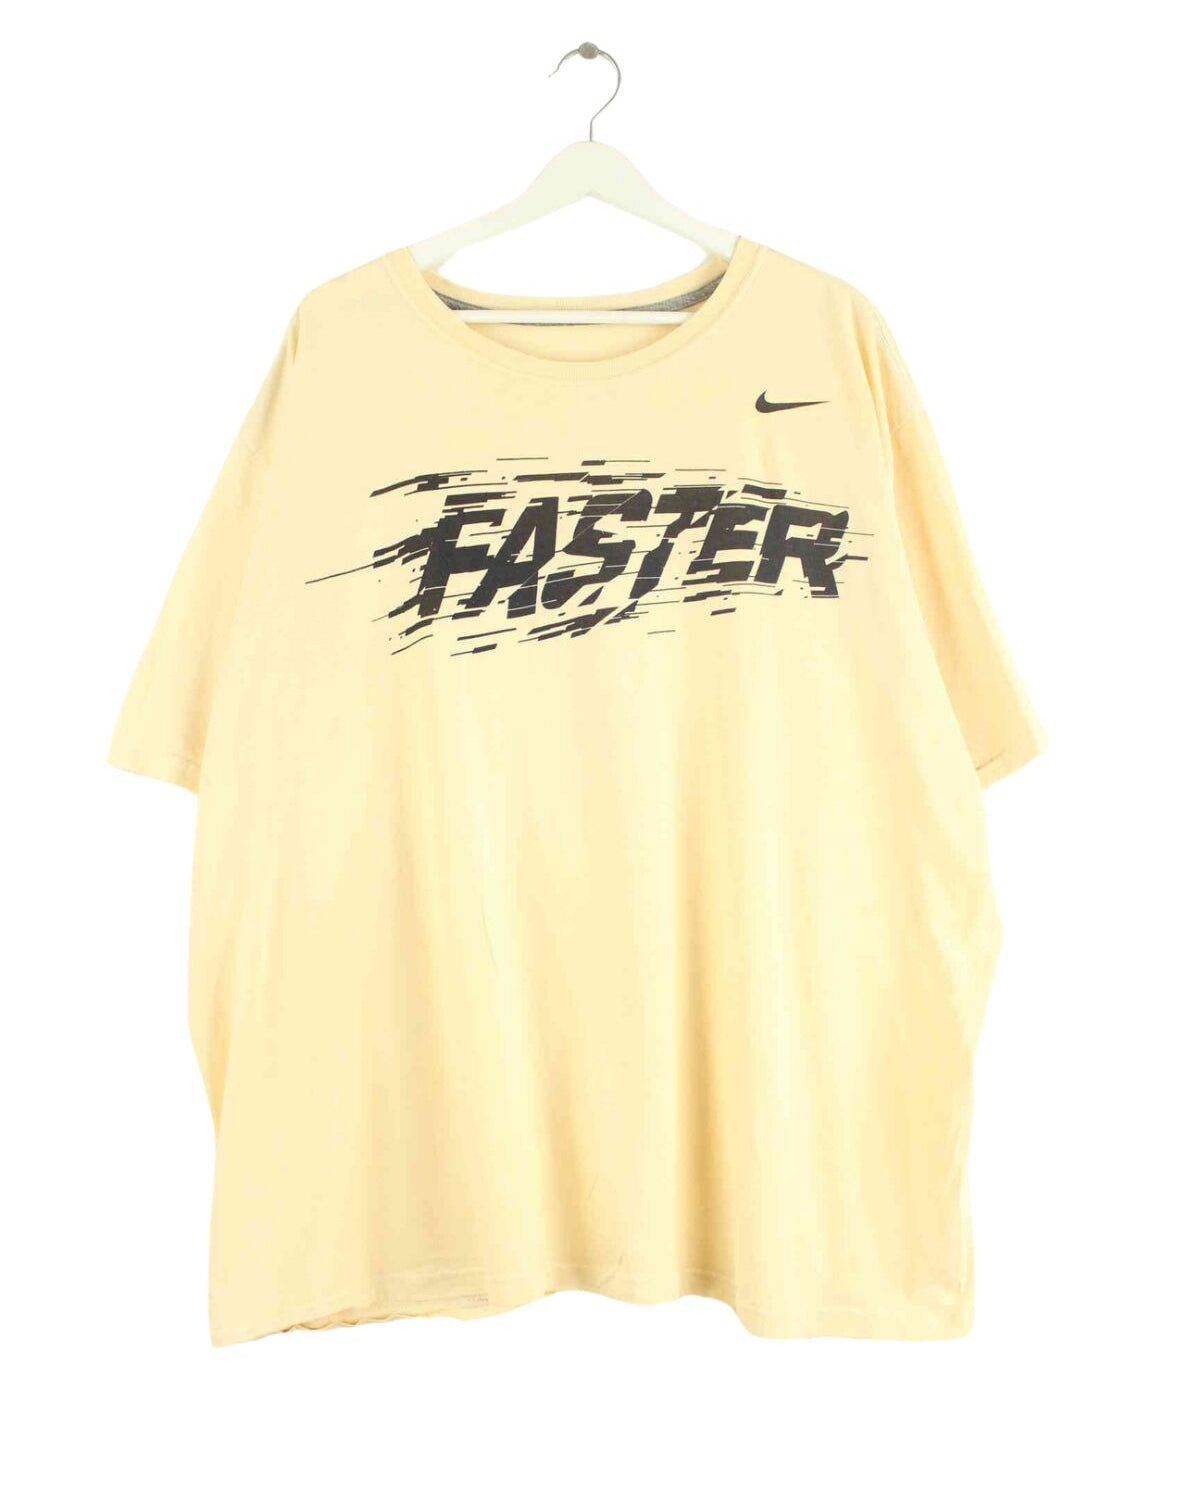 Nike Faster Print T-Shirt Beige 3XL (front image)